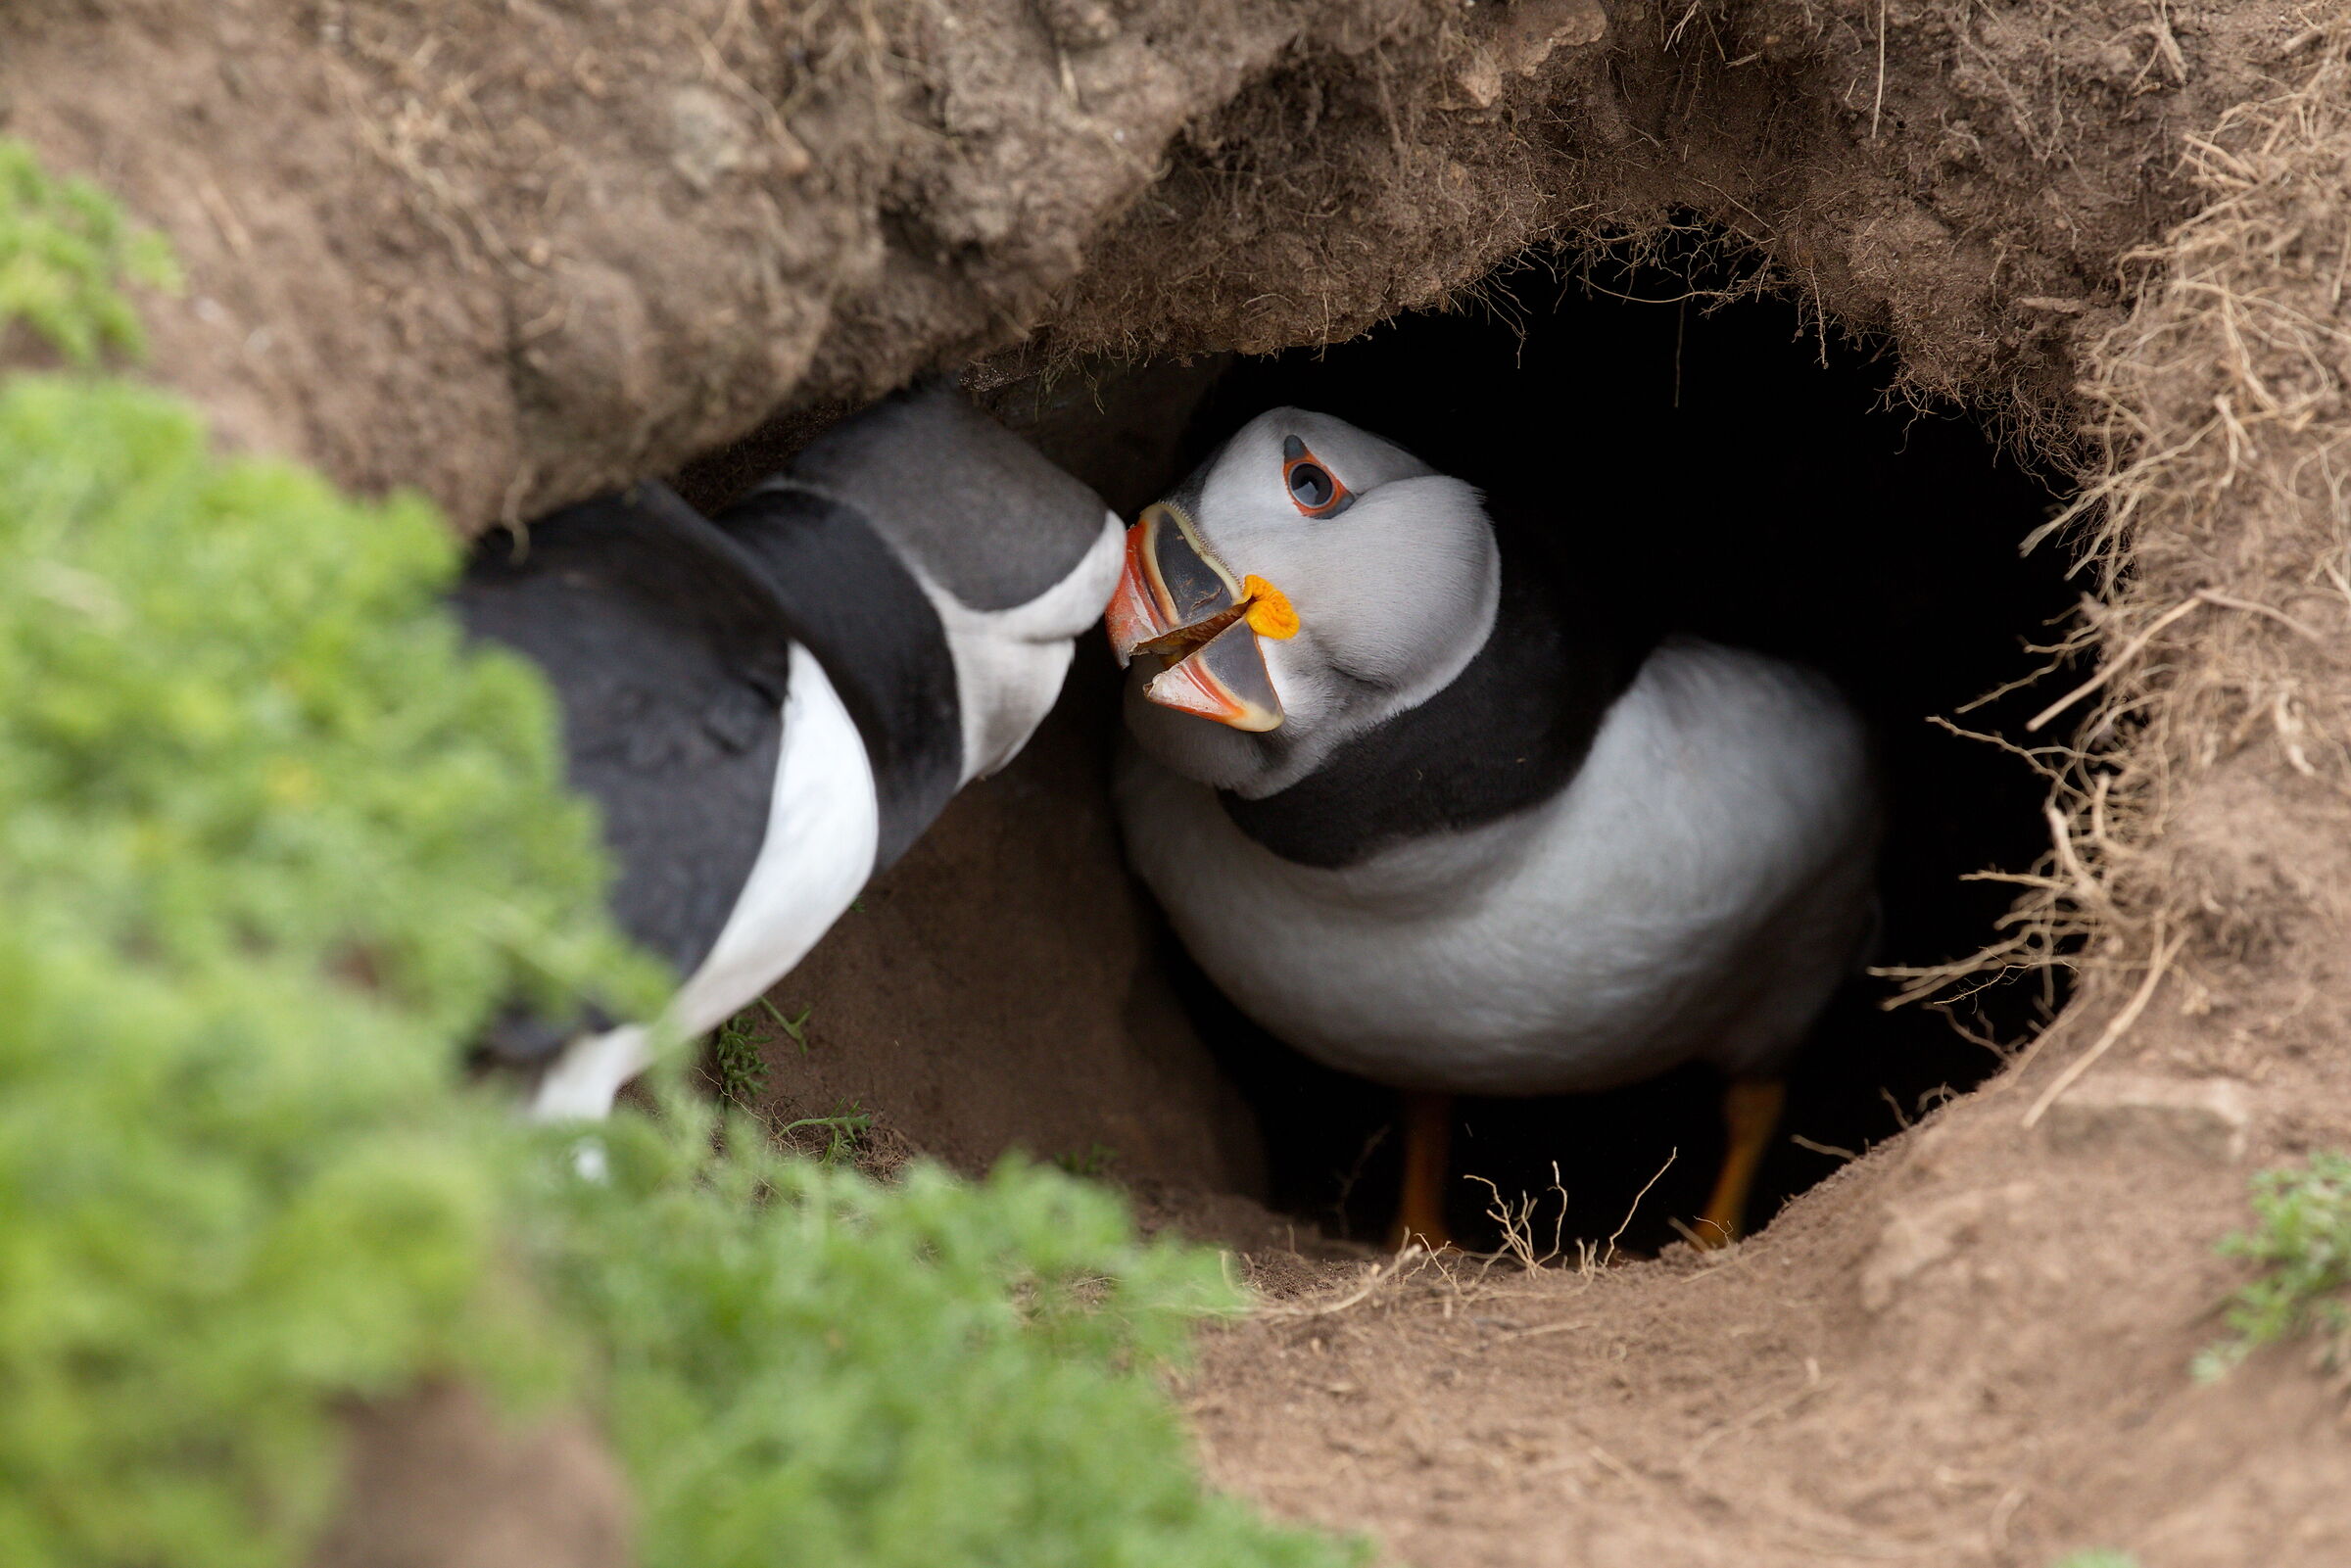 Puffin billing, or how to strengthen the couple...